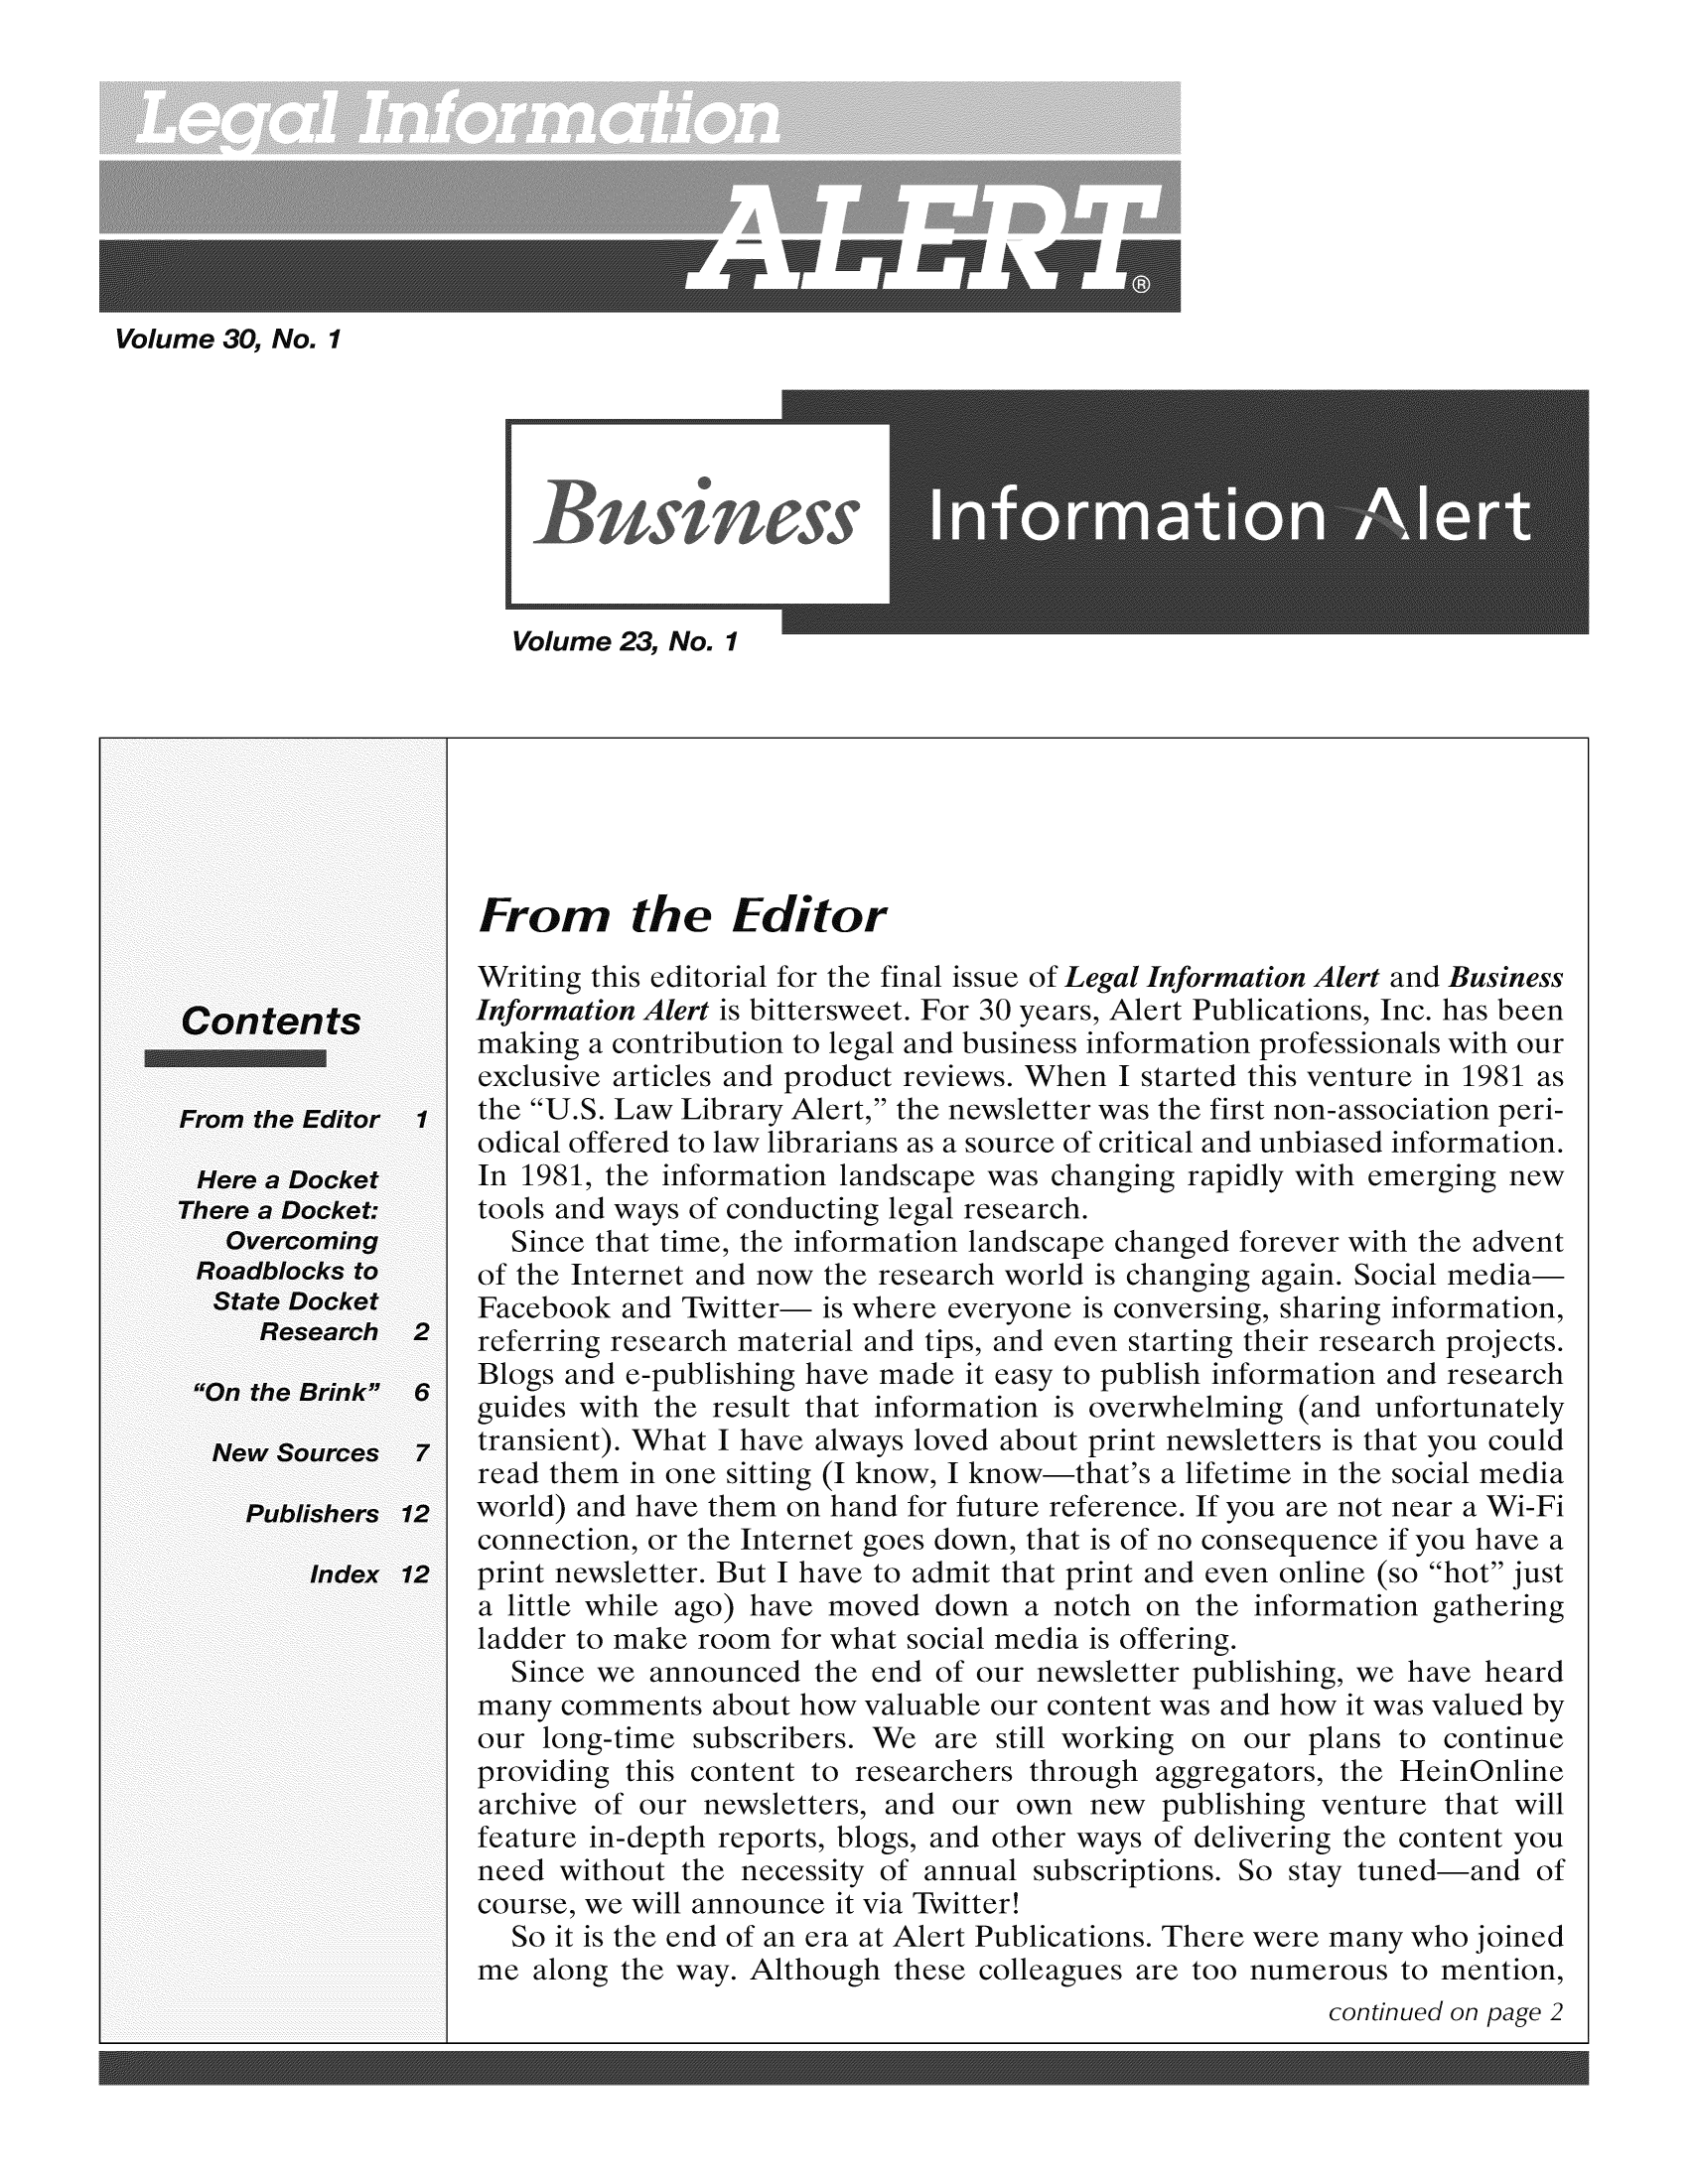 handle is hein.lbr/leinfal0030 and id is 1 raw text is: Volume 30, No. 1

Volume 23, No. 1

From the Editor

Writing this editorial for the final issue of Legal Information Alert and Business
Information Alert is bittersweet. For 30 years, Alert Publications, Inc. has been
making a contribution to legal and business information professionals with our
exclusive articles and product reviews. When I started this venture in 1981 as
the U.S. Law Library Alert, the newsletter was the first non-association peri-
odical offered to law librarians as a source of critical and unbiased information.
In 1981, the information landscape was changing rapidly with emerging new
tools and ways of conducting legal research.
Since that time, the information landscape changed forever with the advent
of the Internet and now the research world is changing again. Social media-
Facebook and Twitter- is where everyone is conversing, sharing information,
referring research material and tips, and even starting their research projects.
Blogs and e-publishing have made it easy to publish information and research
guides with the result that information is overwhelming (and unfortunately
transient). What I have always loved about print newsletters is that you could
read them in one sitting (I know, I know-that's a lifetime in the social media
world) and have them on hand for future reference. If you are not near a Wi-Fi
connection, or the Internet goes down, that is of no consequence if you have a
print newsletter. But I have to admit that print and even online (so hot just
a little while ago) have moved down a notch on the information gathering
ladder to make room for what social media is offering.
Since we announced the end of our newsletter publishing, we have heard
many comments about how valuable our content was and how it was valued by
our long-time subscribers. We are still working on our plans to continue
providing this content to researchers through aggregators, the HeinOnline
archive of our newsletters, and our own new publishing venture that will
feature in-depth reports, blogs, and other ways of delivering the content you
need without the necessity of annual subscriptions. So stay tuned-and of
course, we will announce it via Twitter!
So it is the end of an era at Alert Publications. There were many who joined
me along the way. Although these colleagues are too numerous to mention,
continued on page 2


